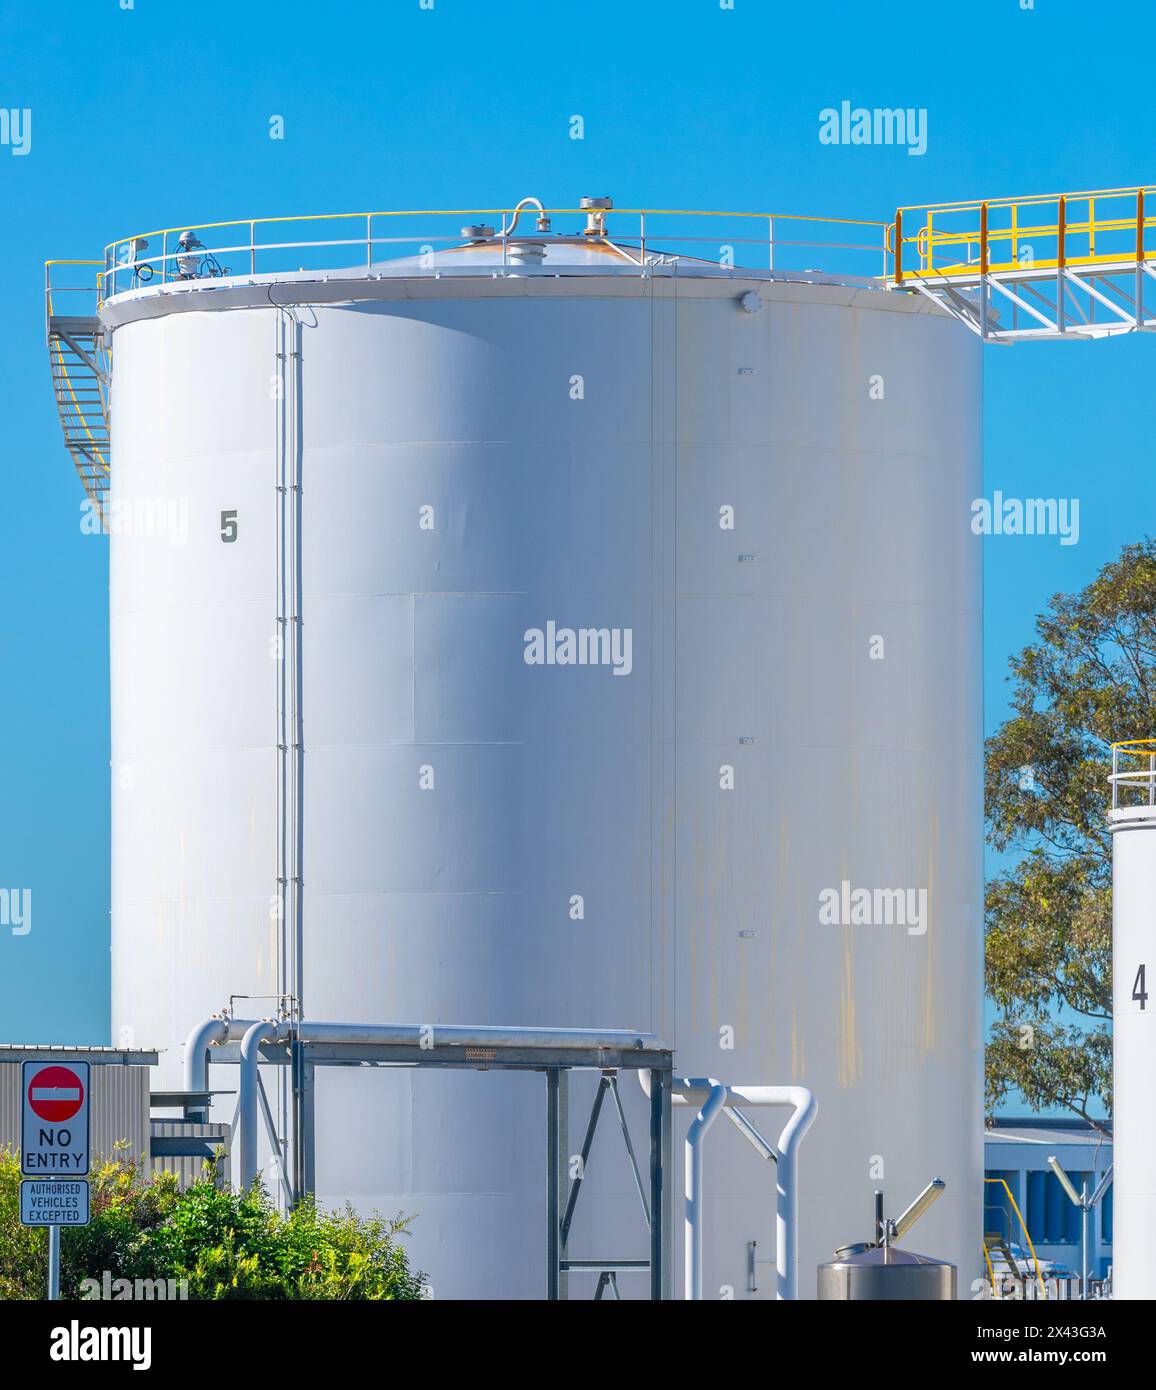 A jet fuel storage container at Sydney (Kingsford Smith) Airport in Sydney, Australia. Stock Photo